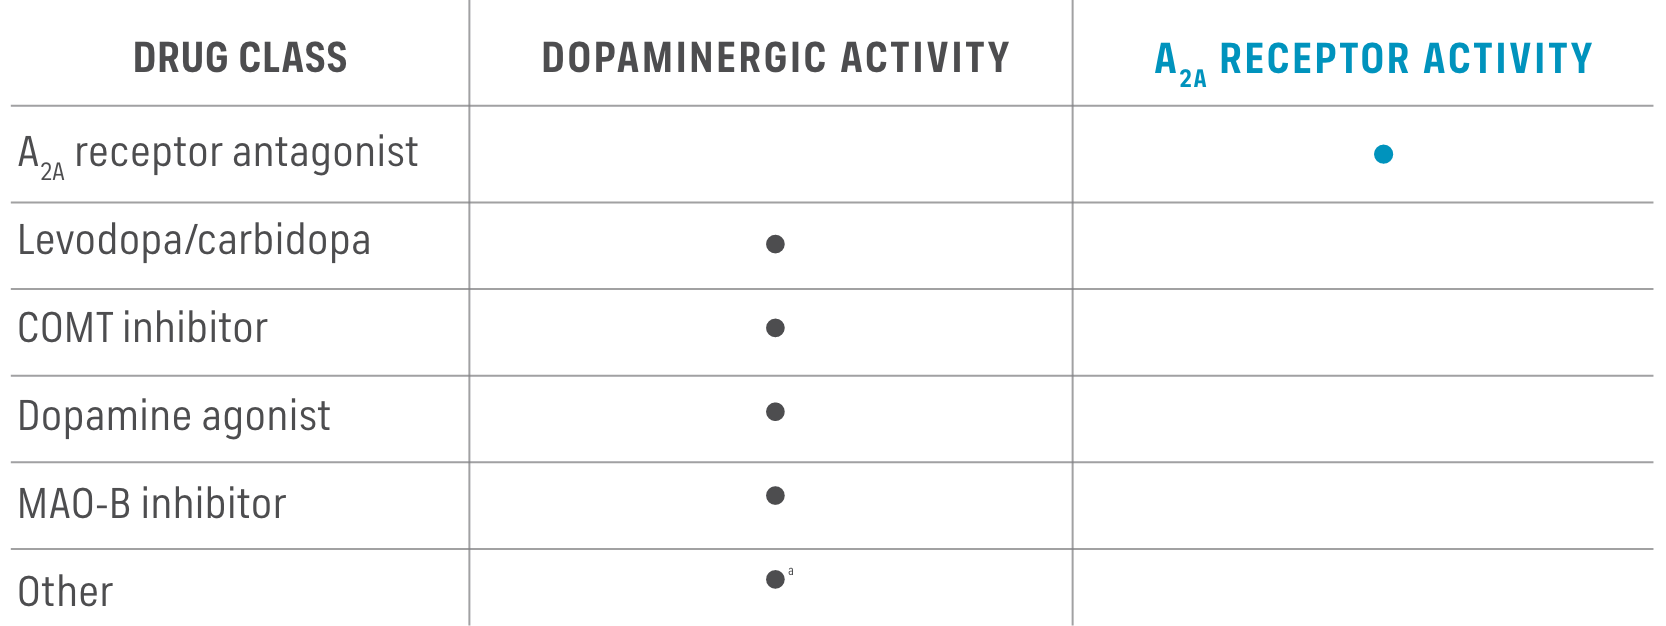 Table with drug class and dopamine and A2A receptor activity and how NOURIANZ® (istradefylline) is different than other adjunctive treatments for “off” episodes in Parkinson’s disease